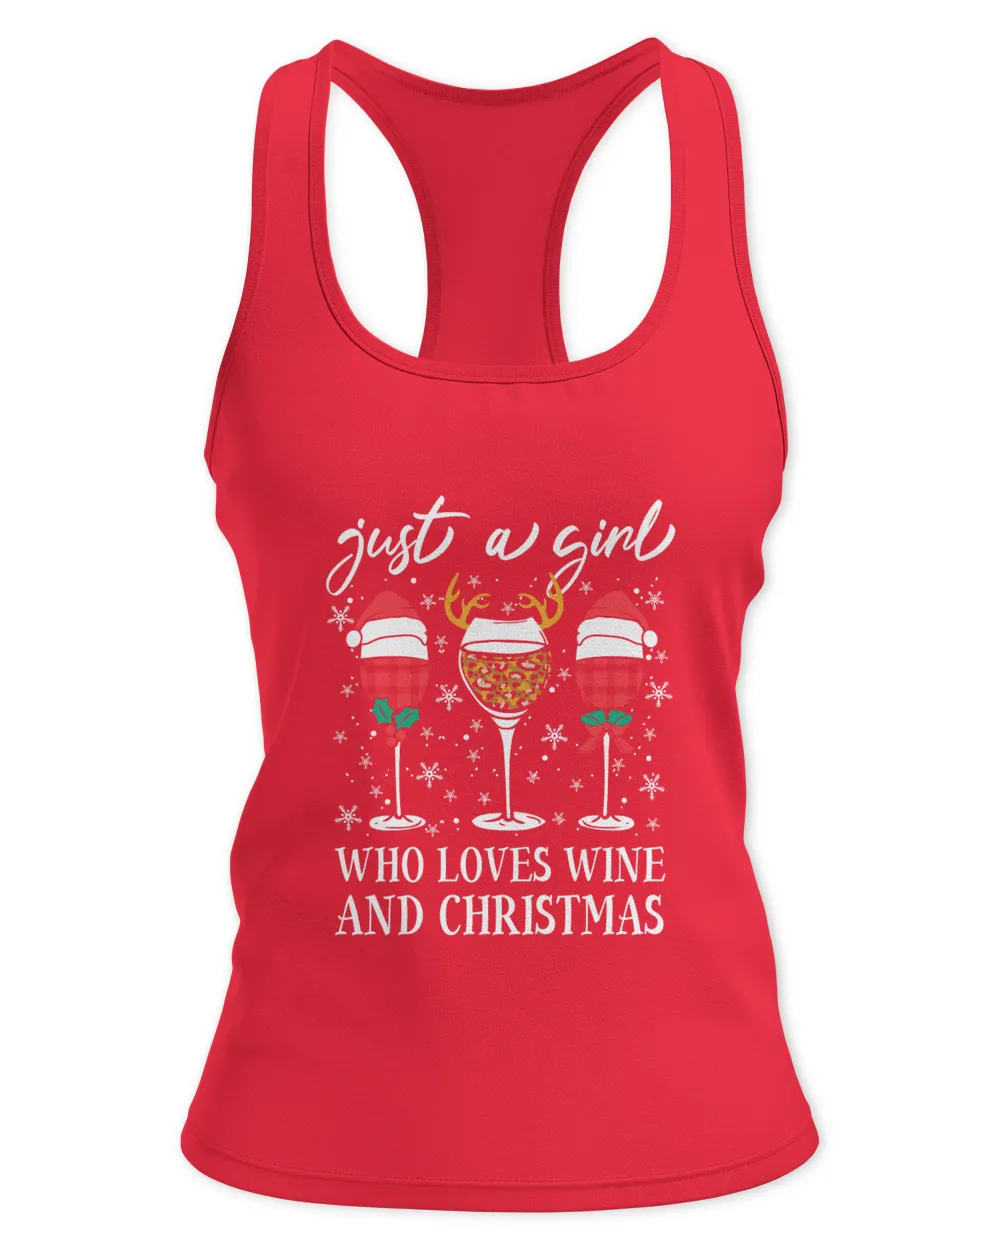 Just A Girl Who Loves Wine And Christmas Women's Standard T-Shirt